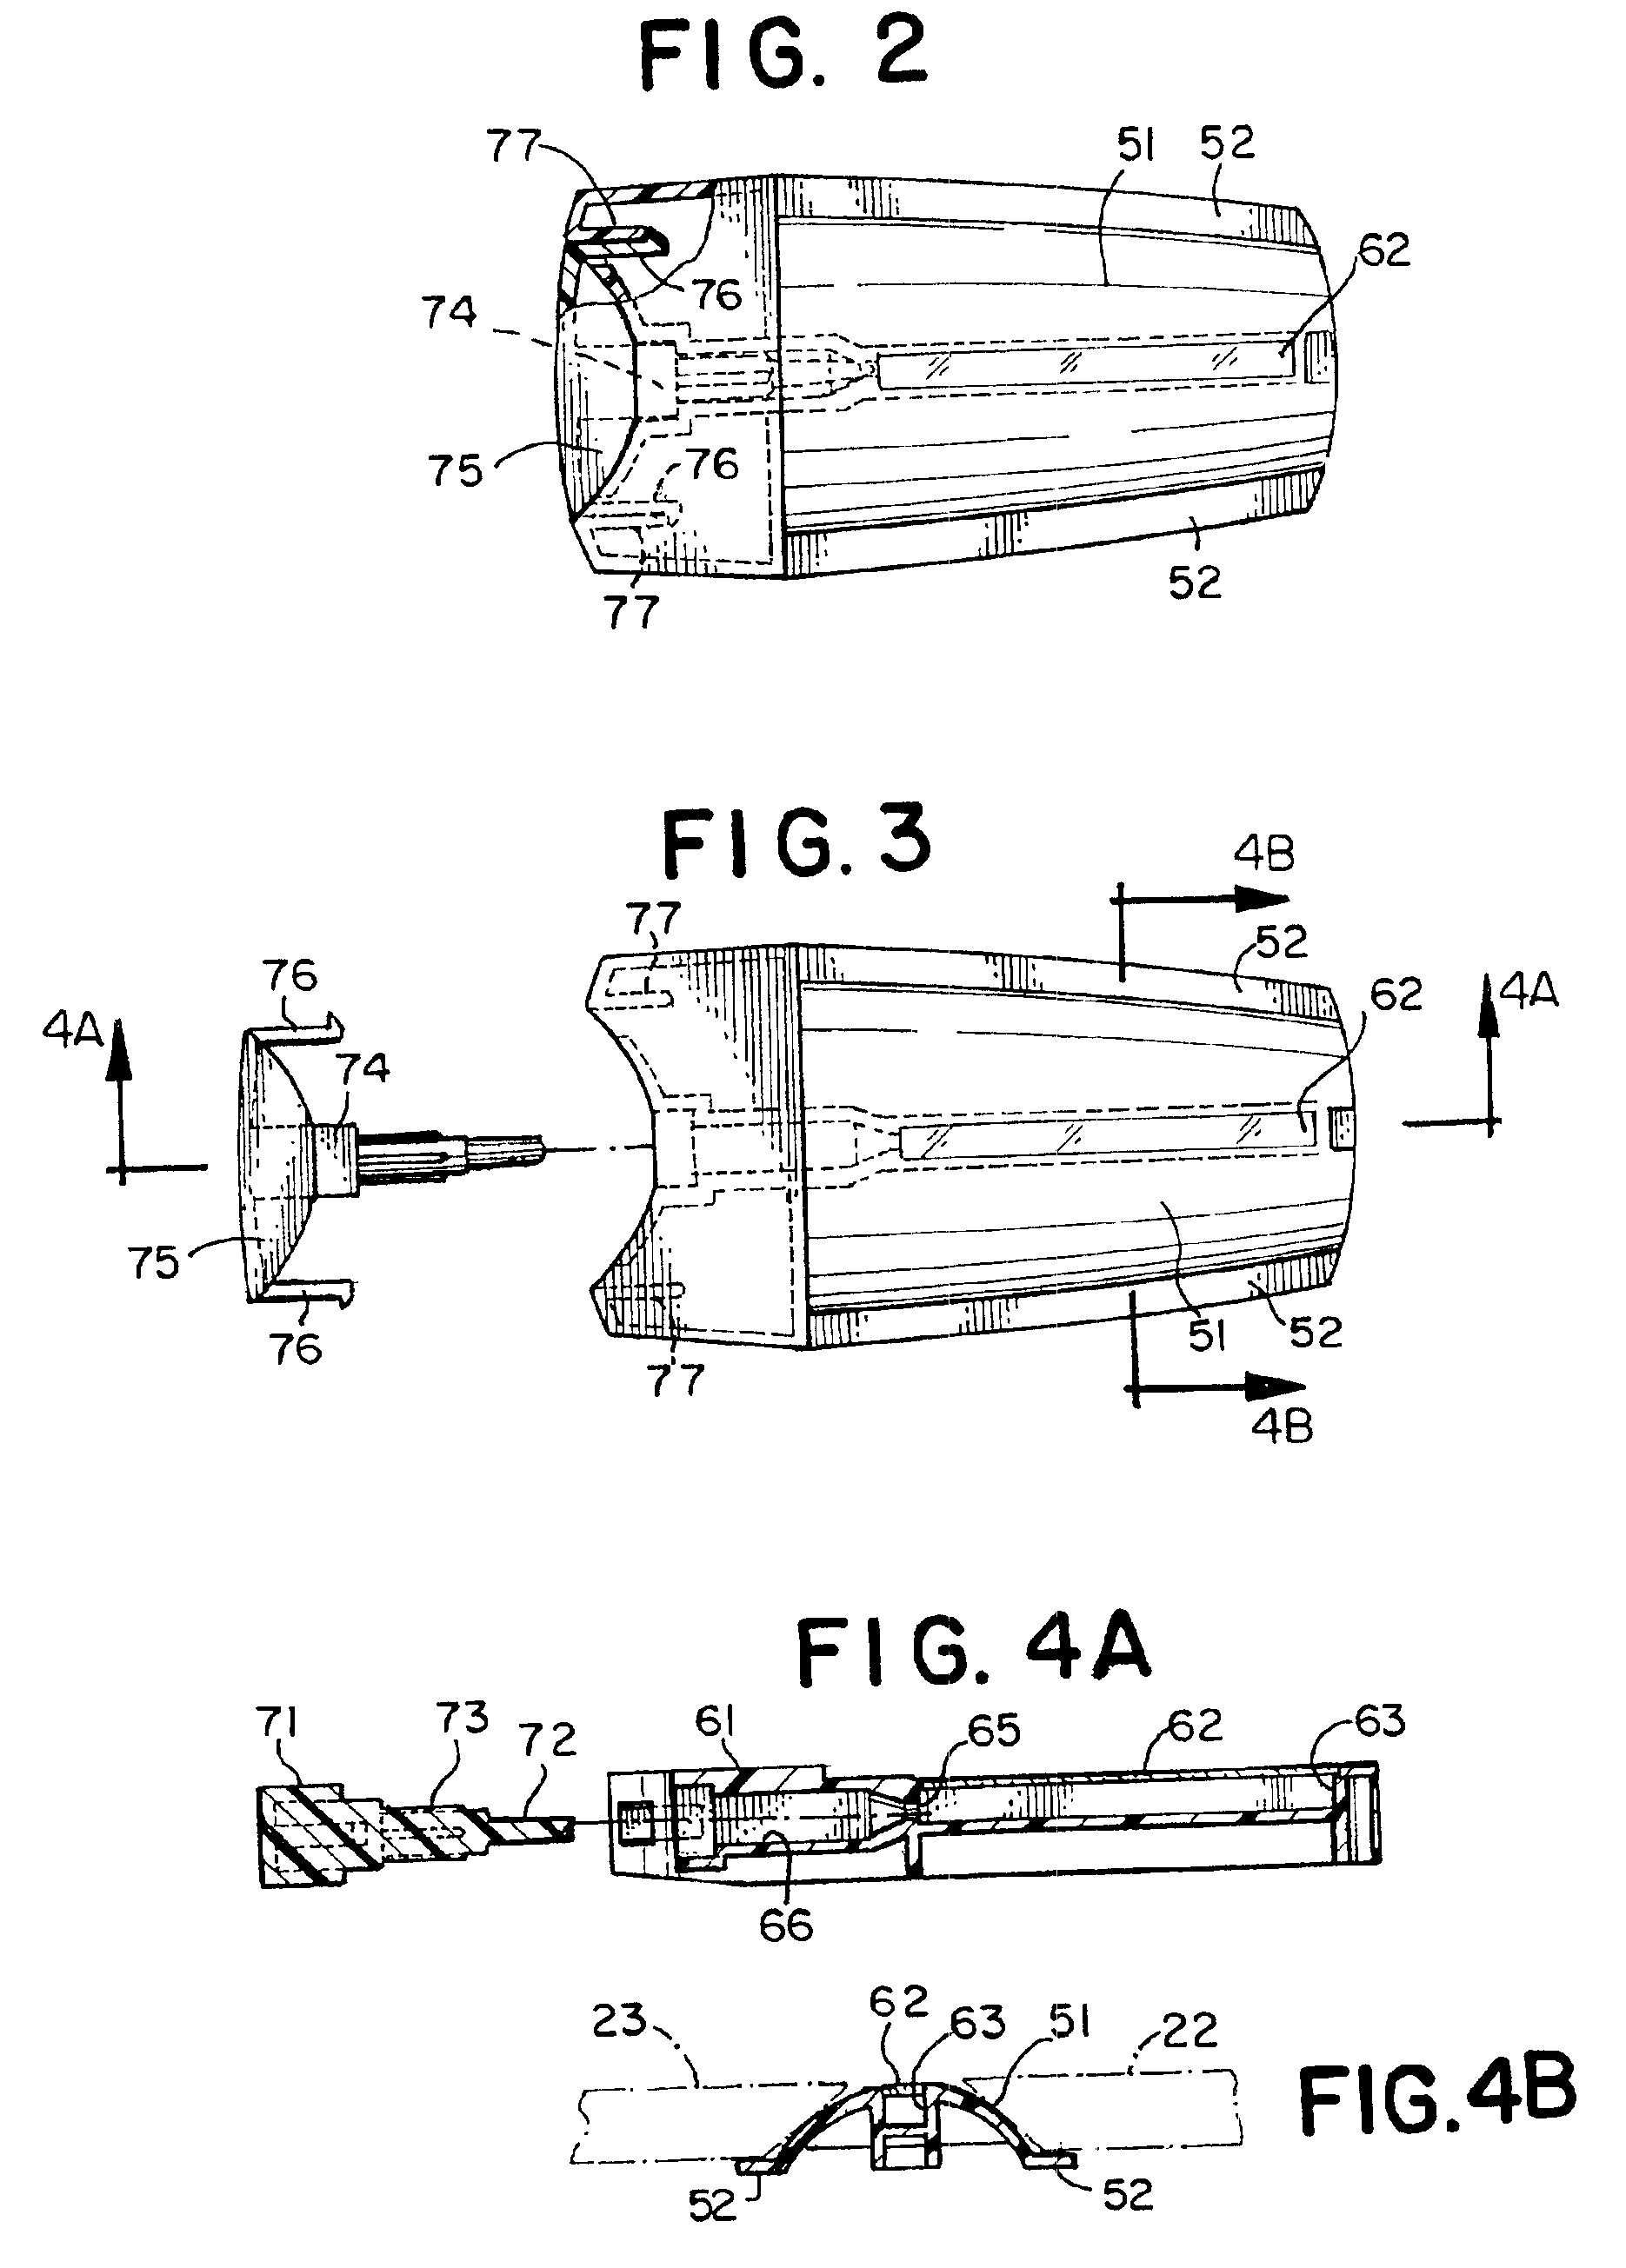 Method of using a cartridge for containing a specimen sample for optical analysis